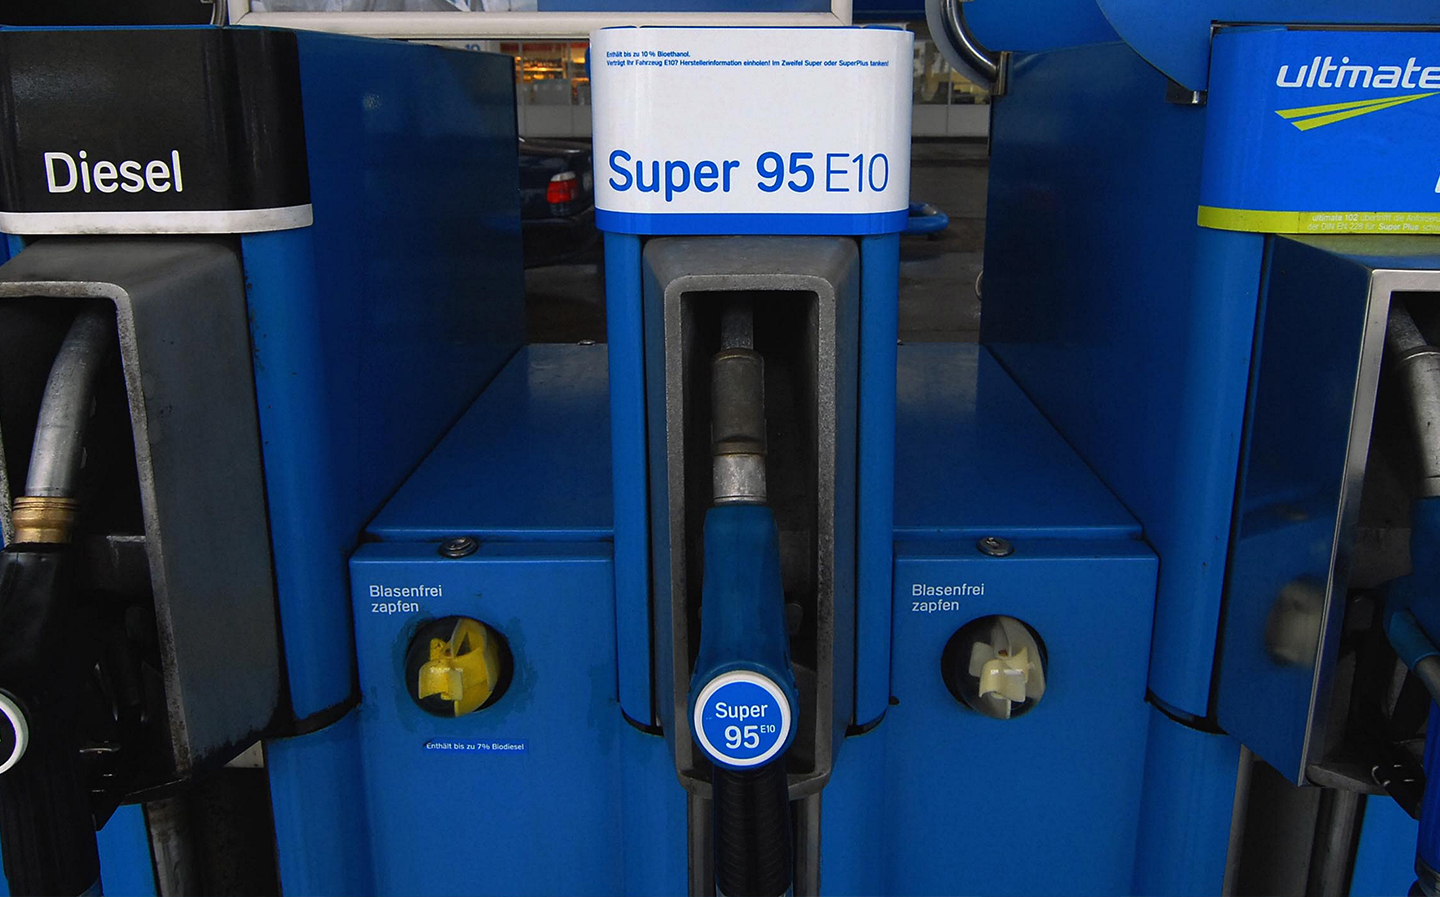 Green new E10 fuel could lead to higher pump prices